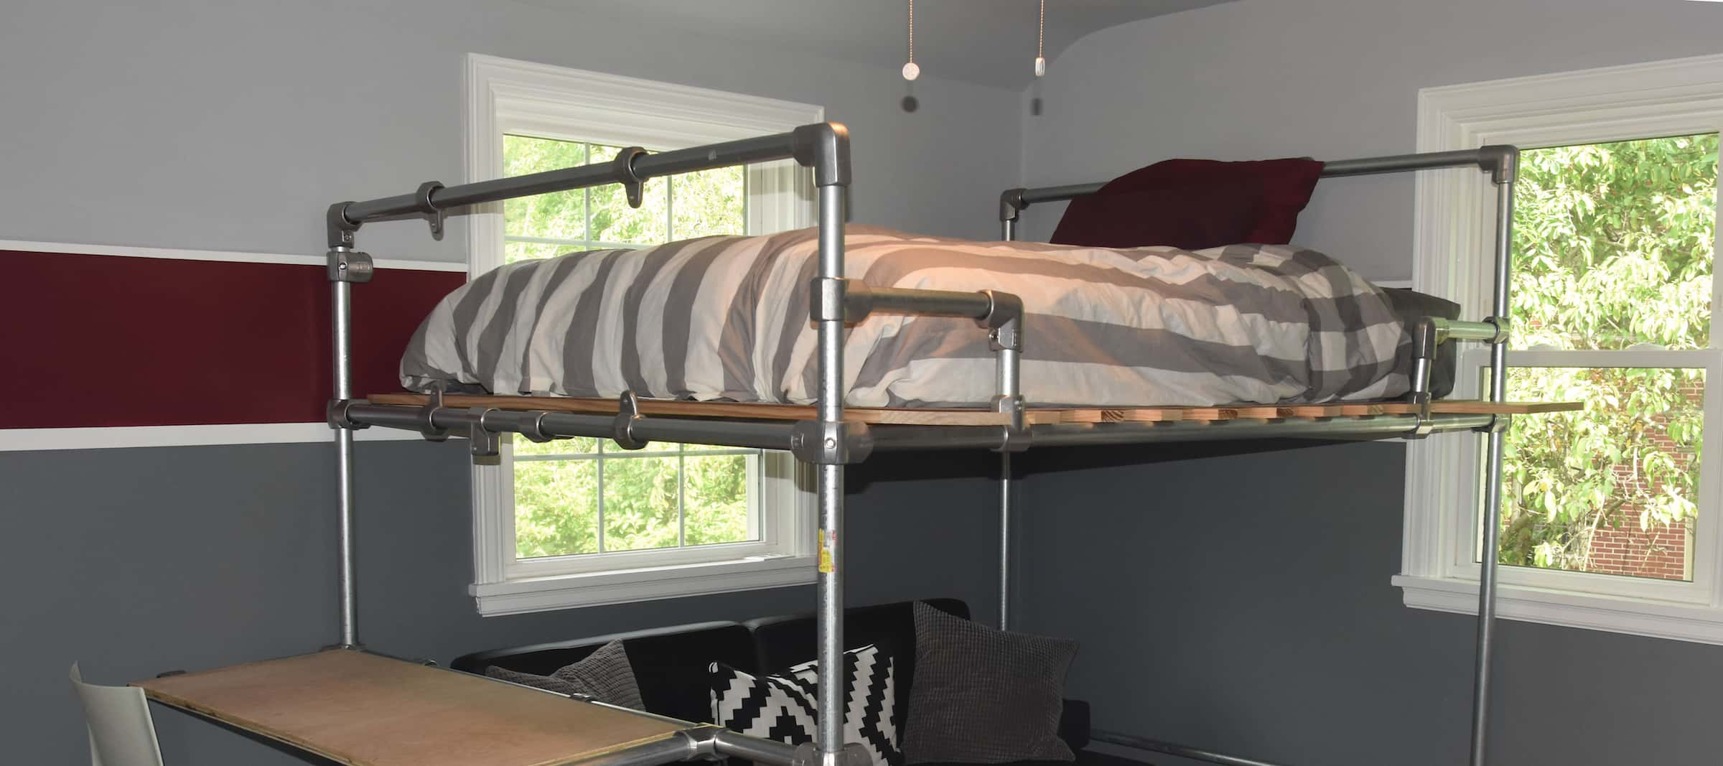 20 Diy Pipe Bed Frame Ideas And Plans, Diy Industrial Bunk Bed